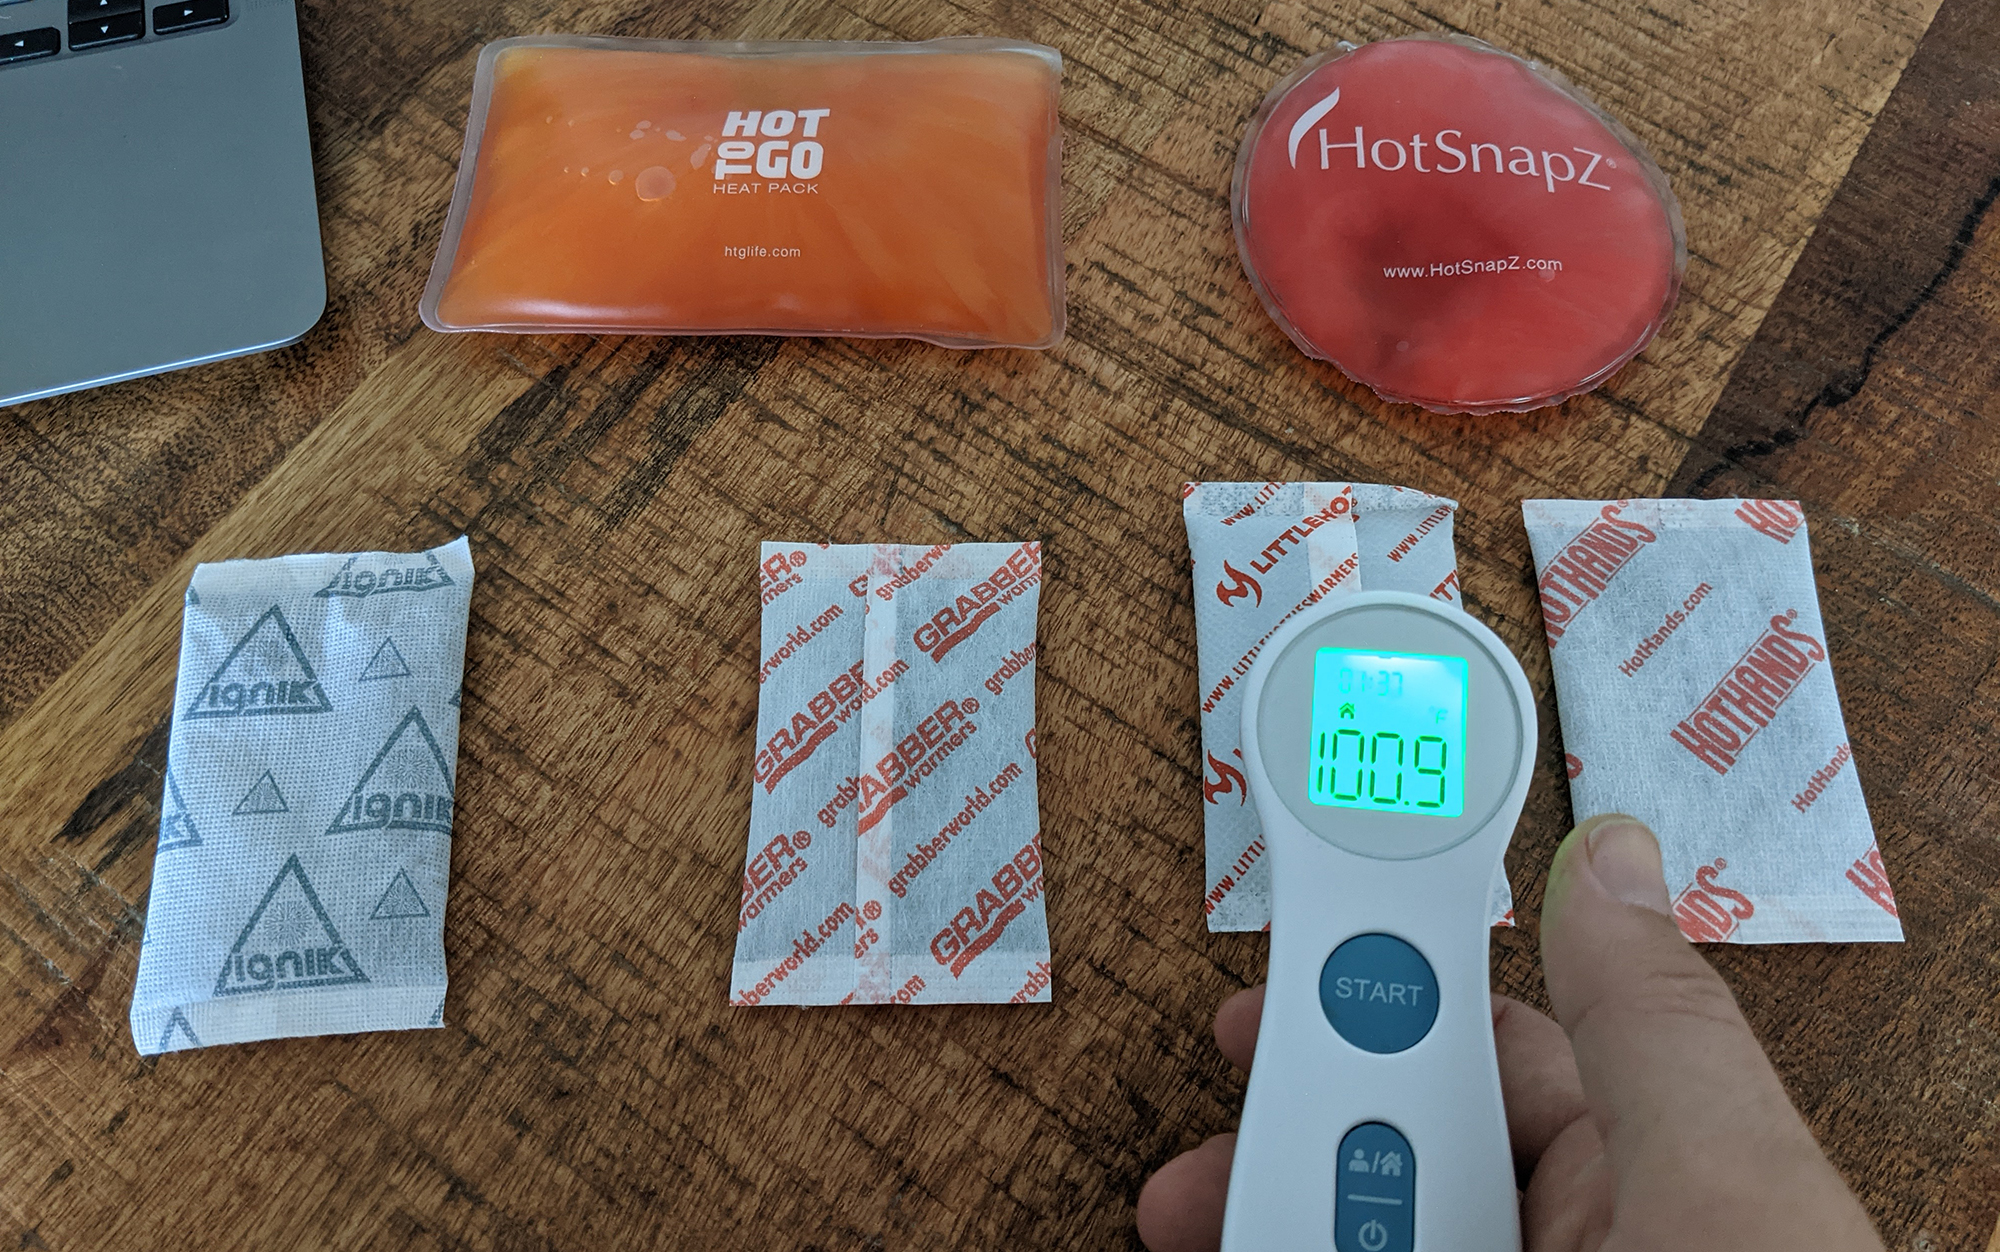 Measuring the real-time temperatures of the hand warmers over twelve hours.